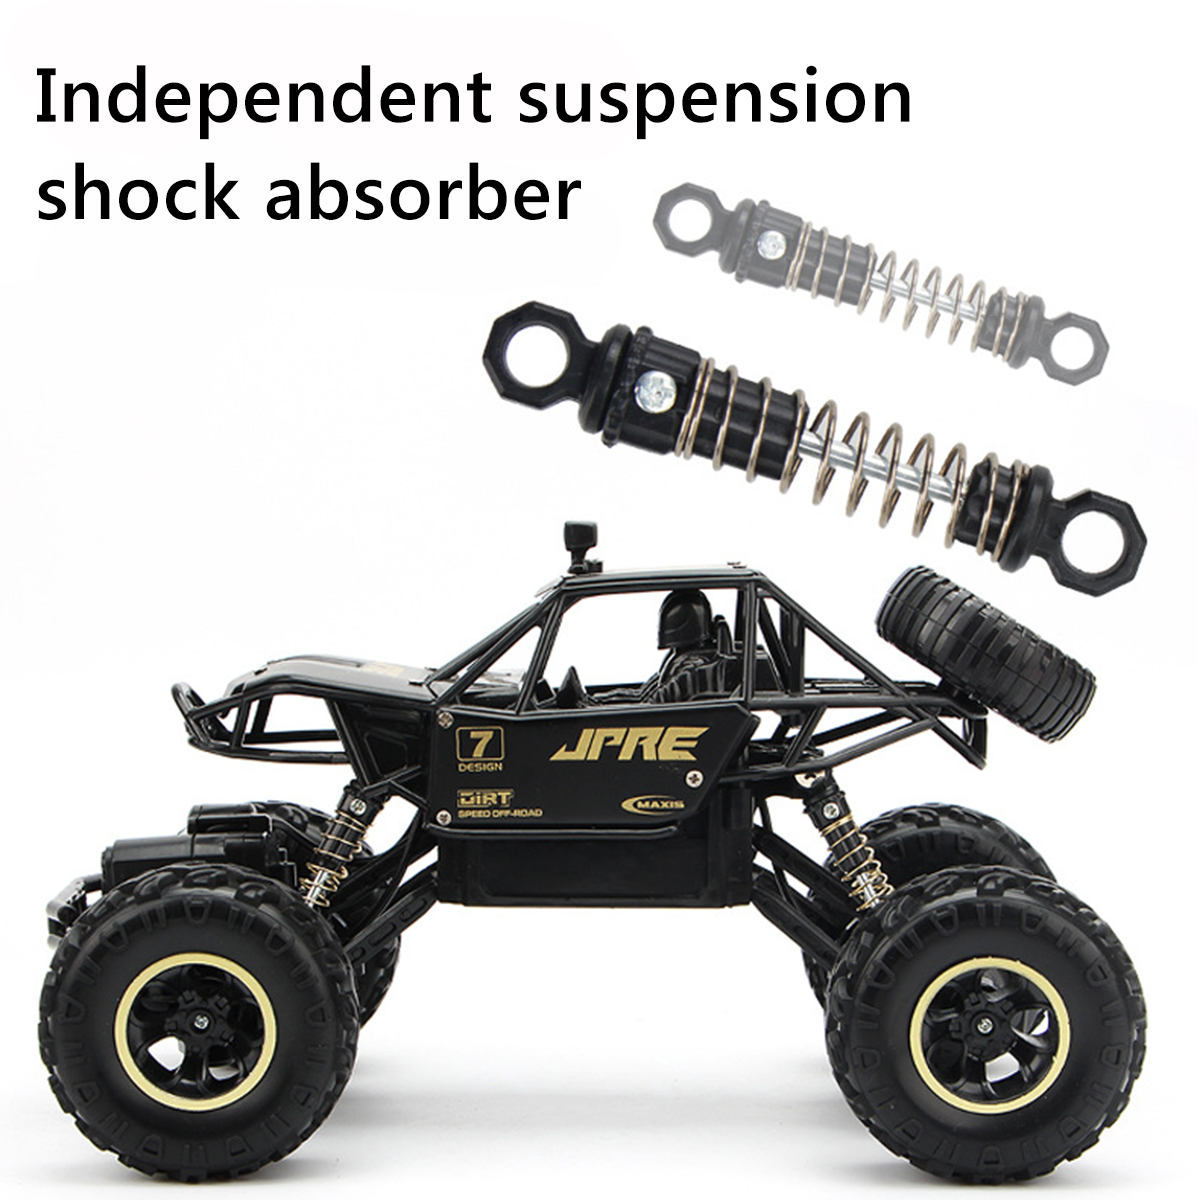 1:16 Alloy Remote Controls Car Monster Trucks, 4WD Climbing RC Cars Off Road, RC Crawler Toys for Boys Kids Gifts - image 6 of 11